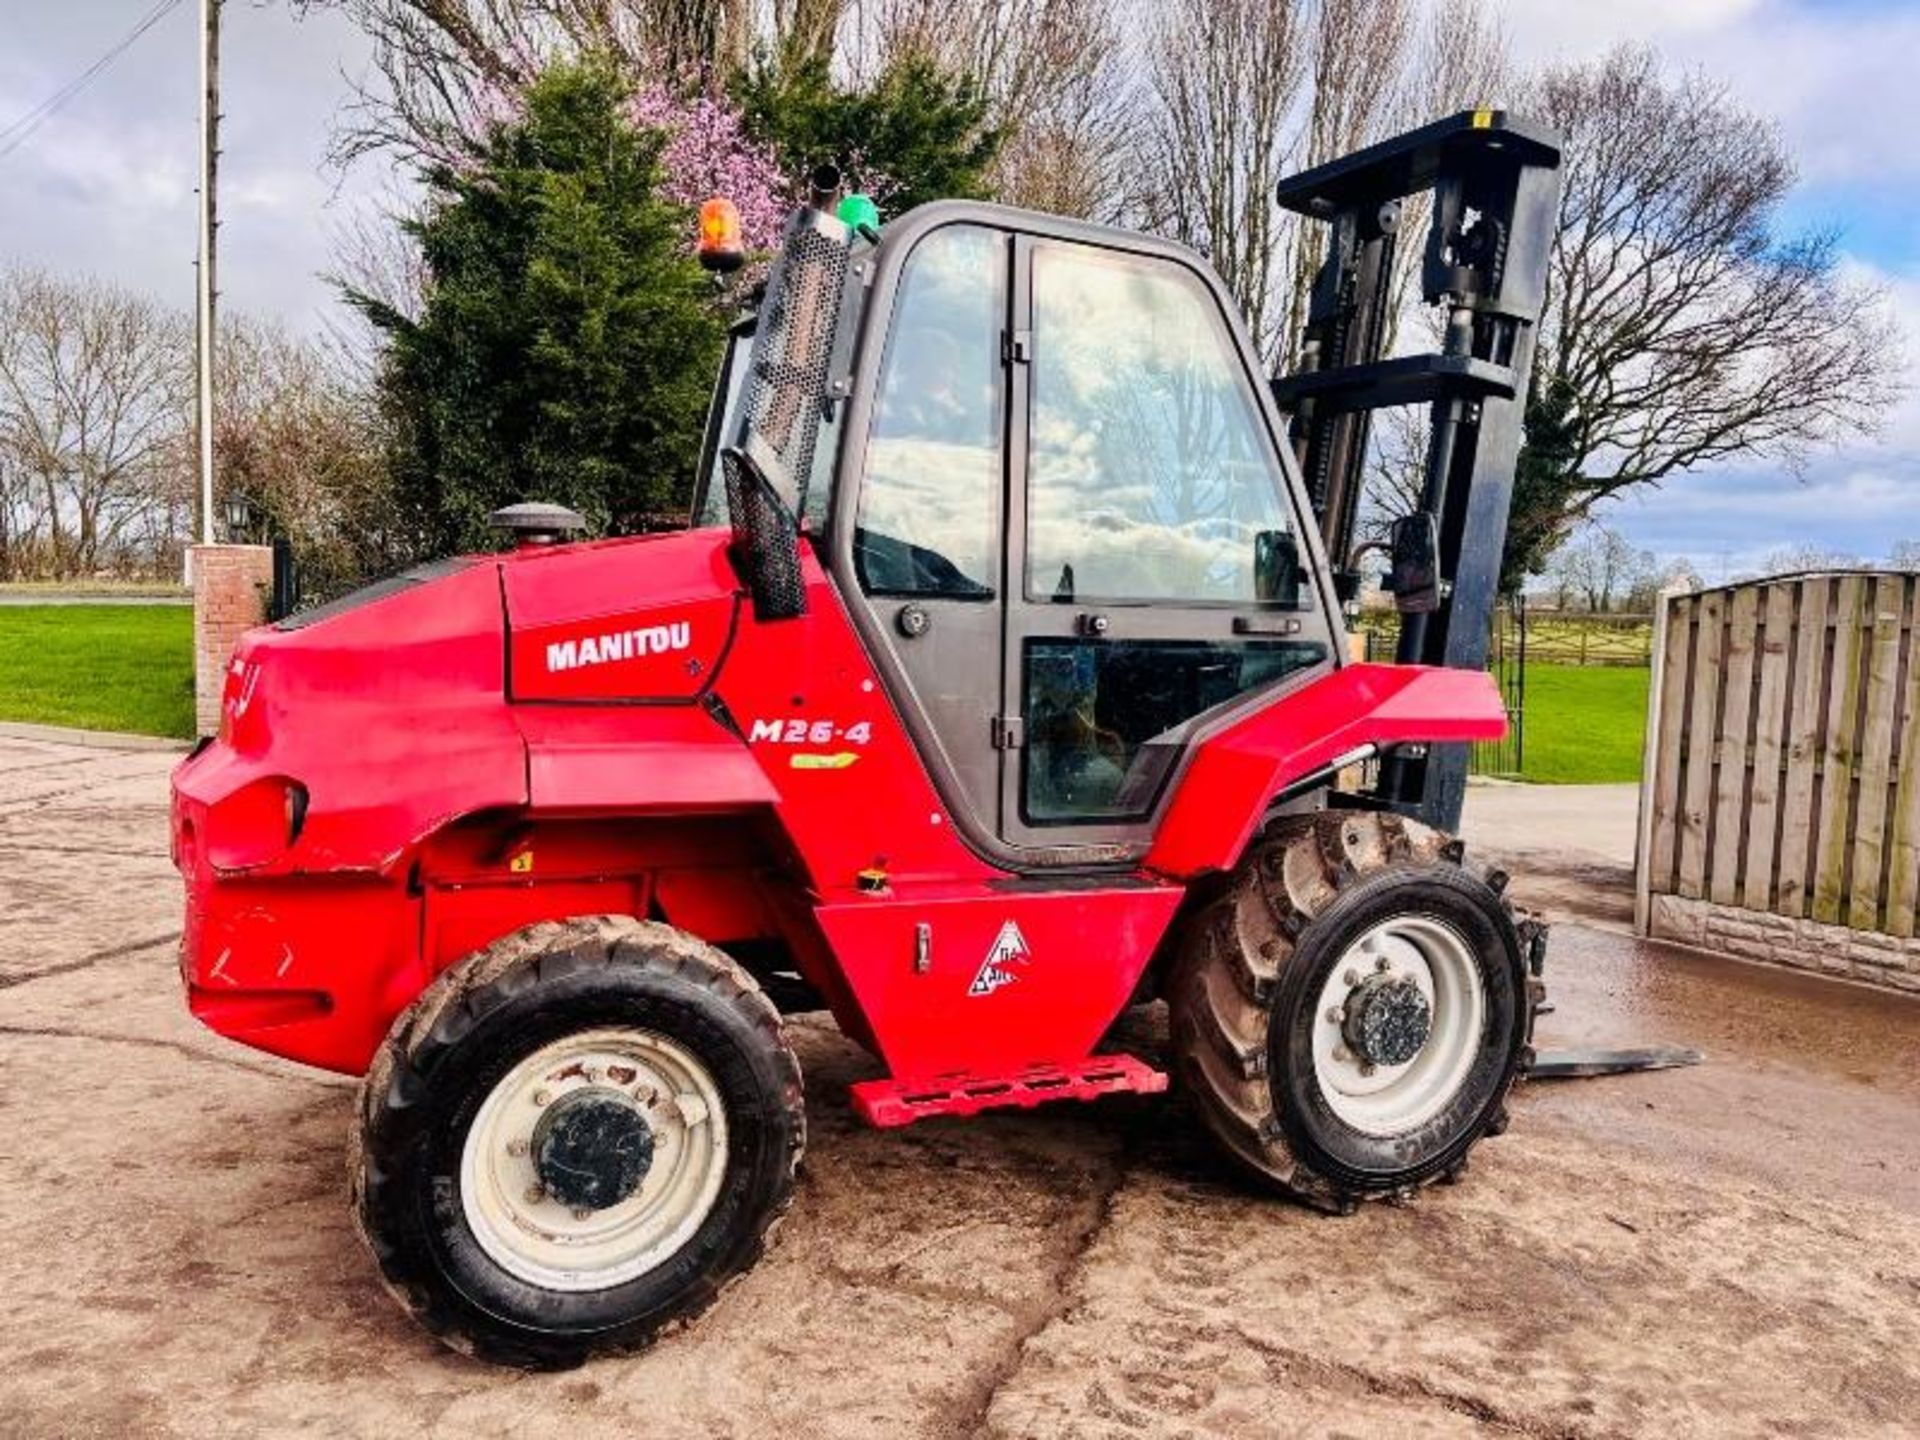 MANITOU M26-4 ROUGH TERRIAN 4WD FORKLIFT *YEAR 2017* C/W PALLET TINES - Image 12 of 16